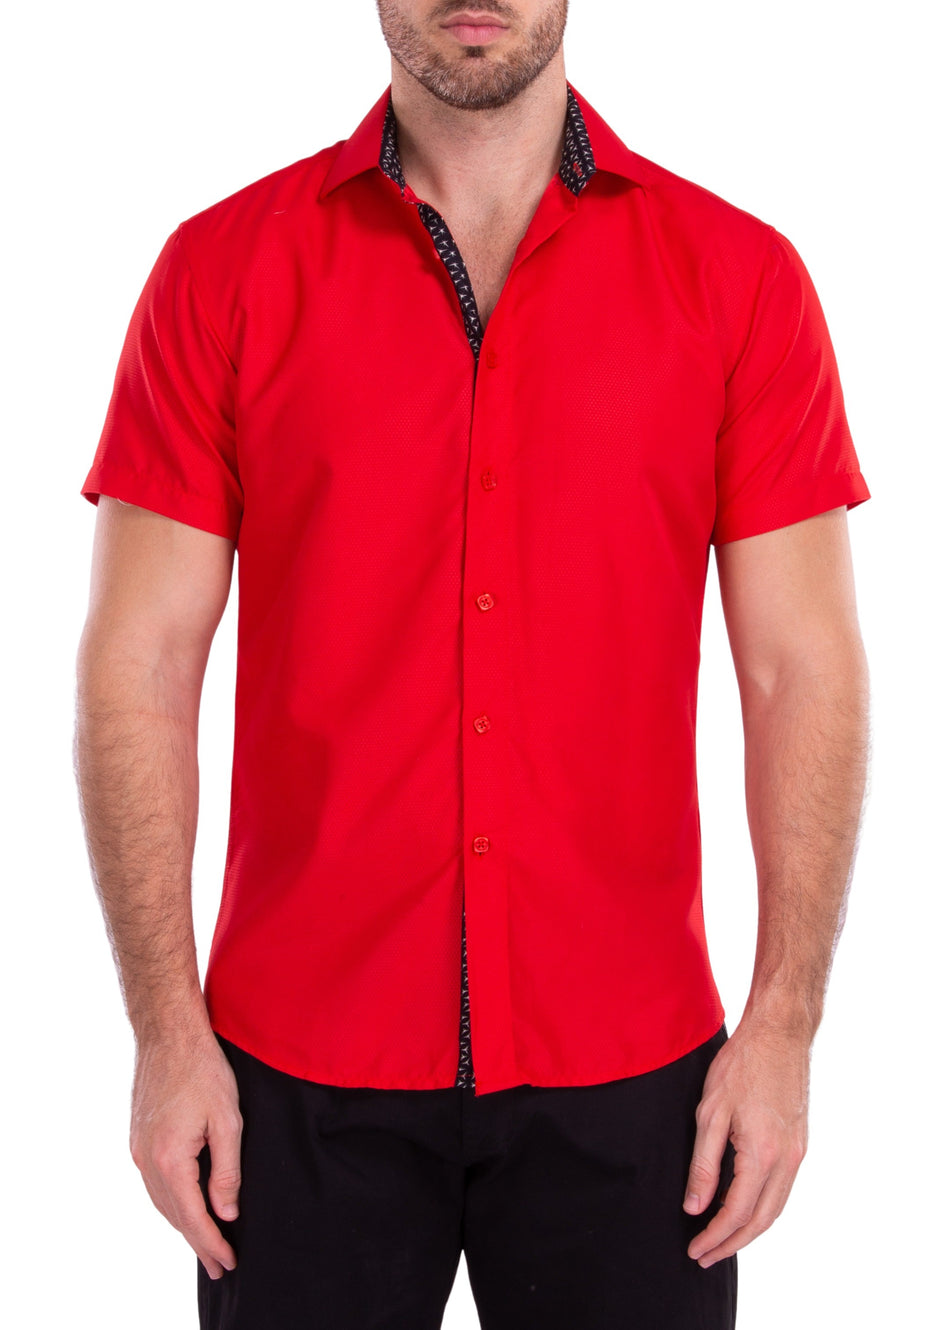 202013 - Red Short Sleeve